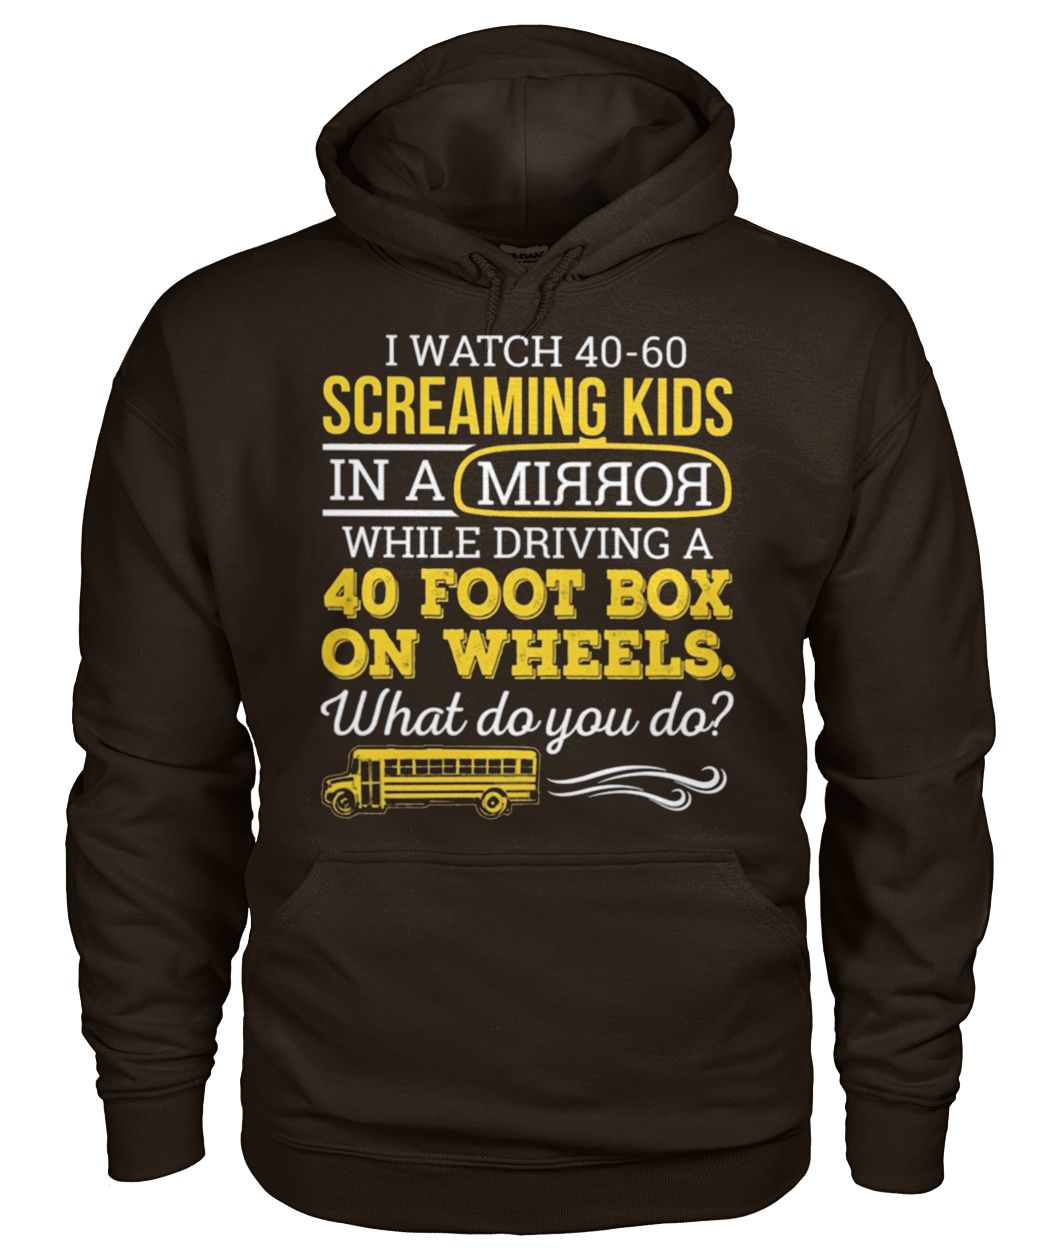 Bus driver I watch 40-60 screaming kids in a mirror while driving a 40 foot box on wheels gildan hoodie